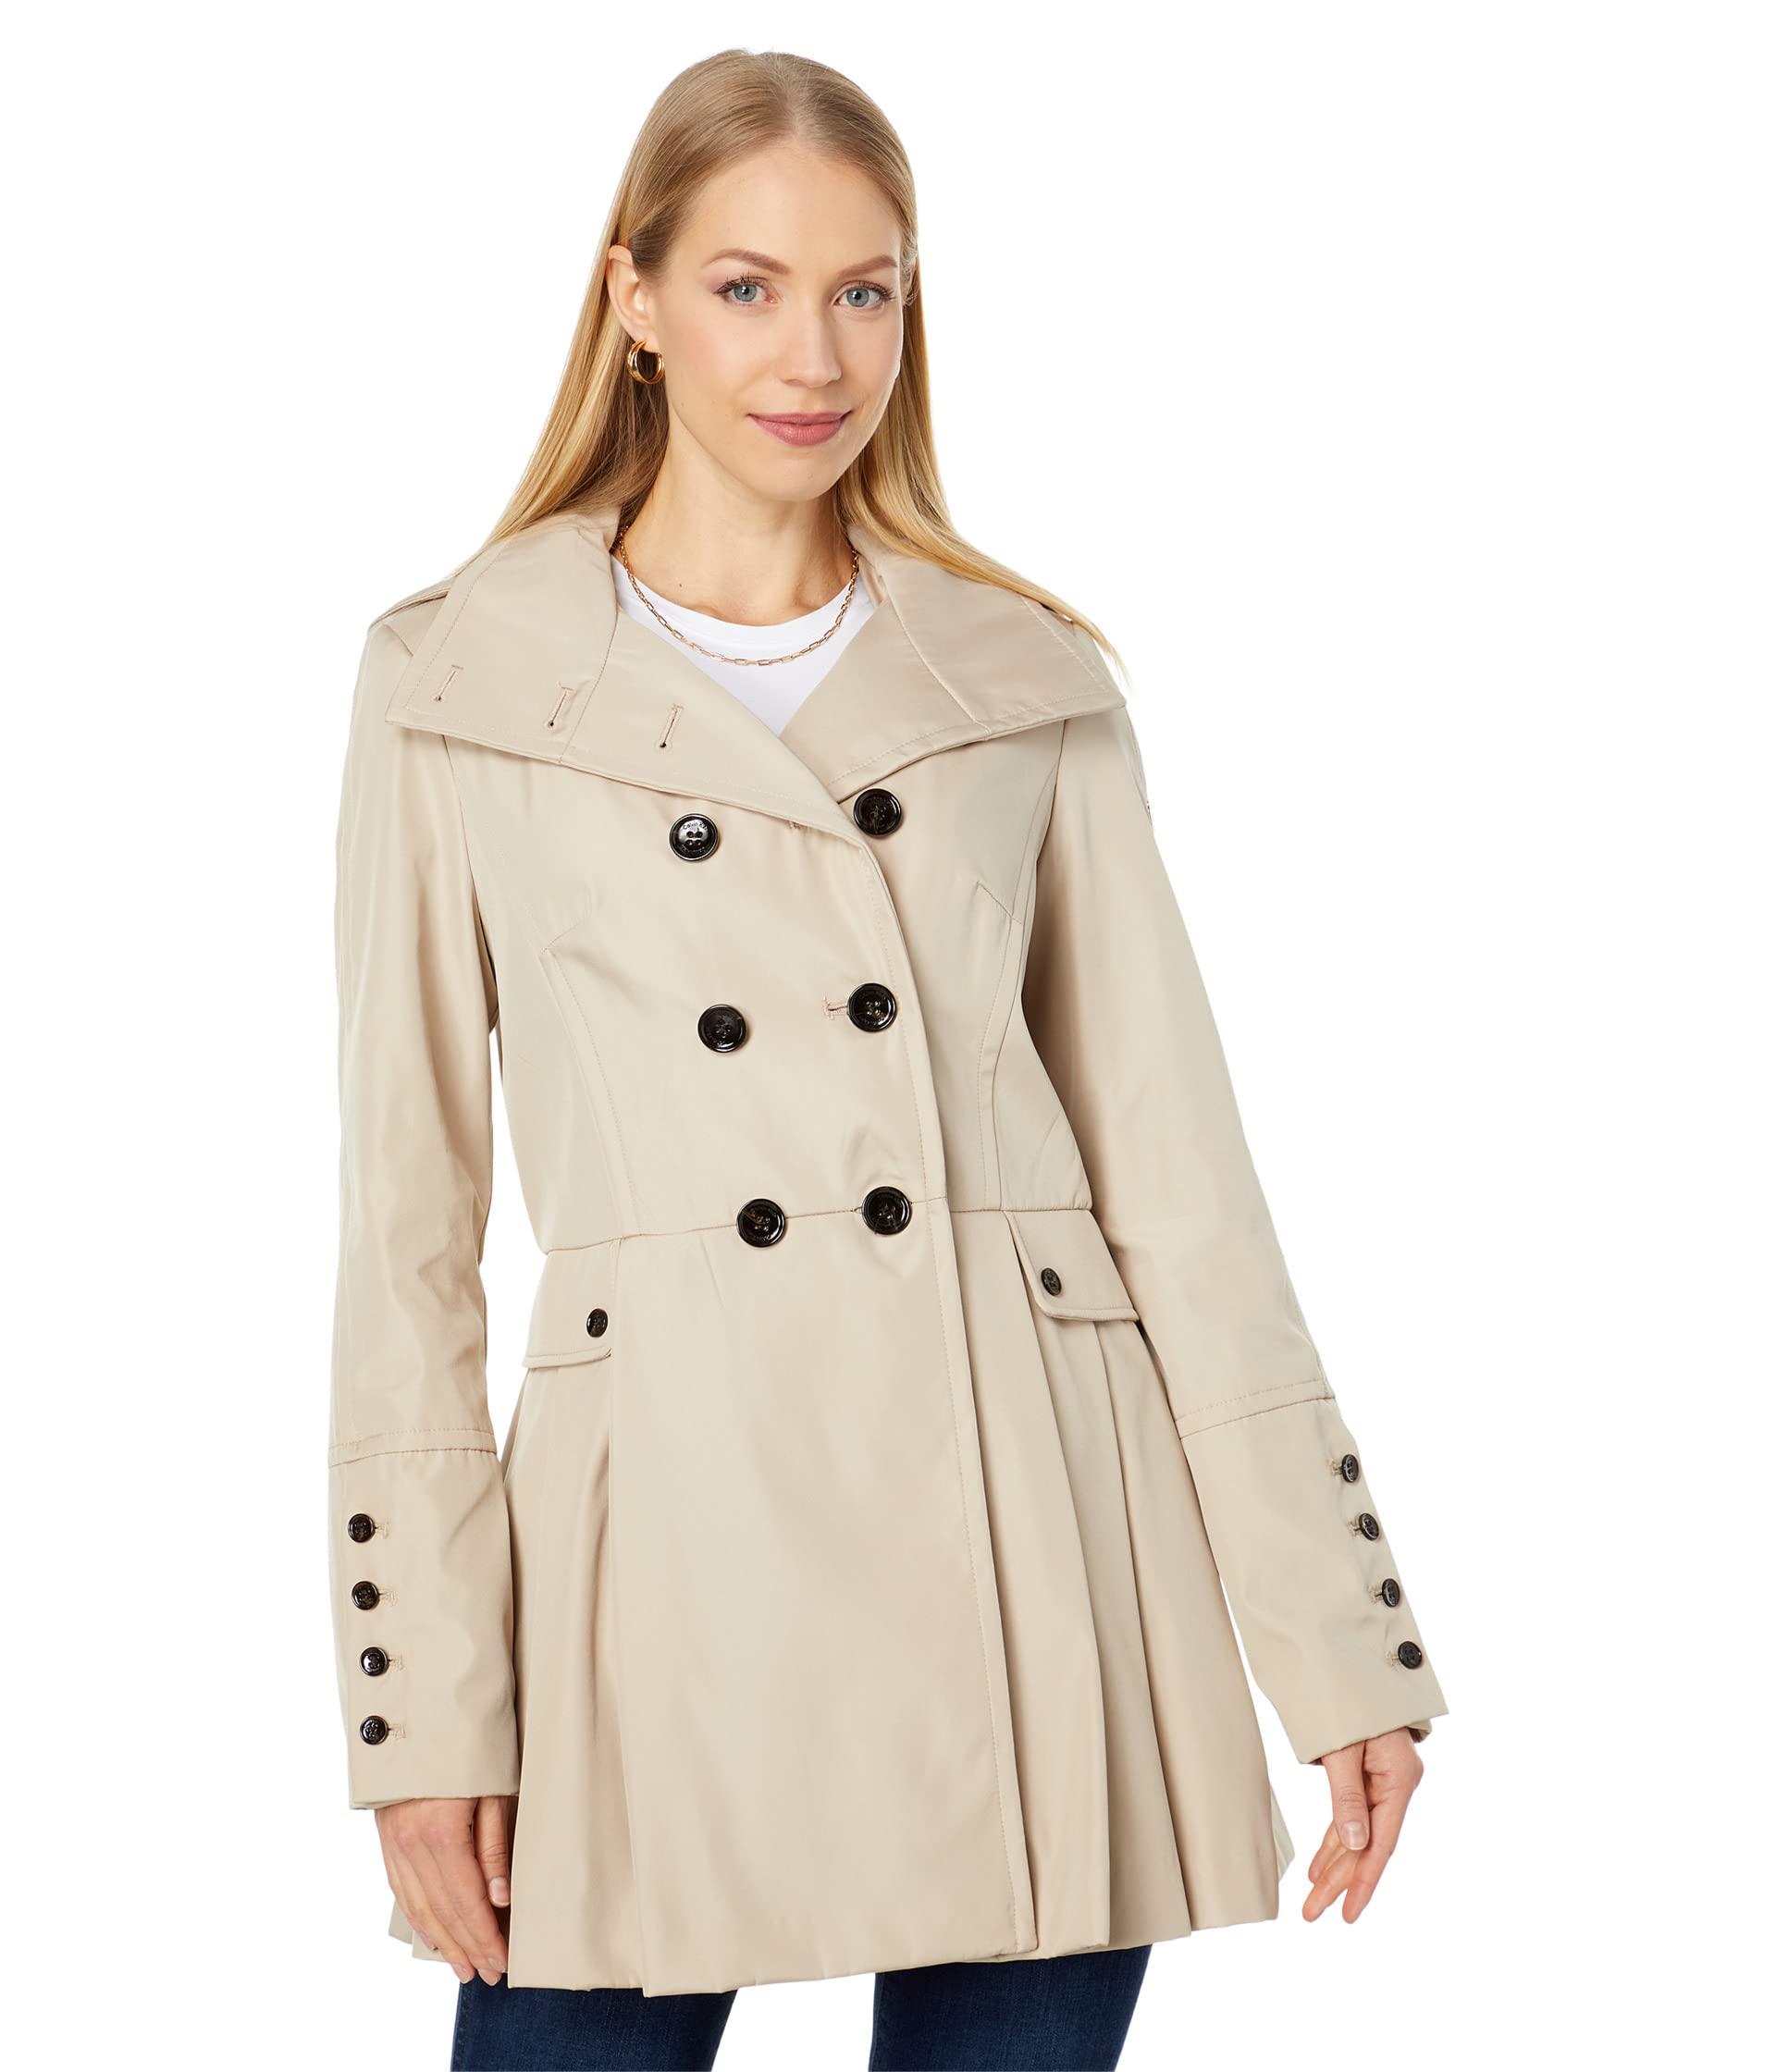 Verlichting zuiger Controle Calvin Klein Double Breasted Skirted Raincoat in Natural | Lyst